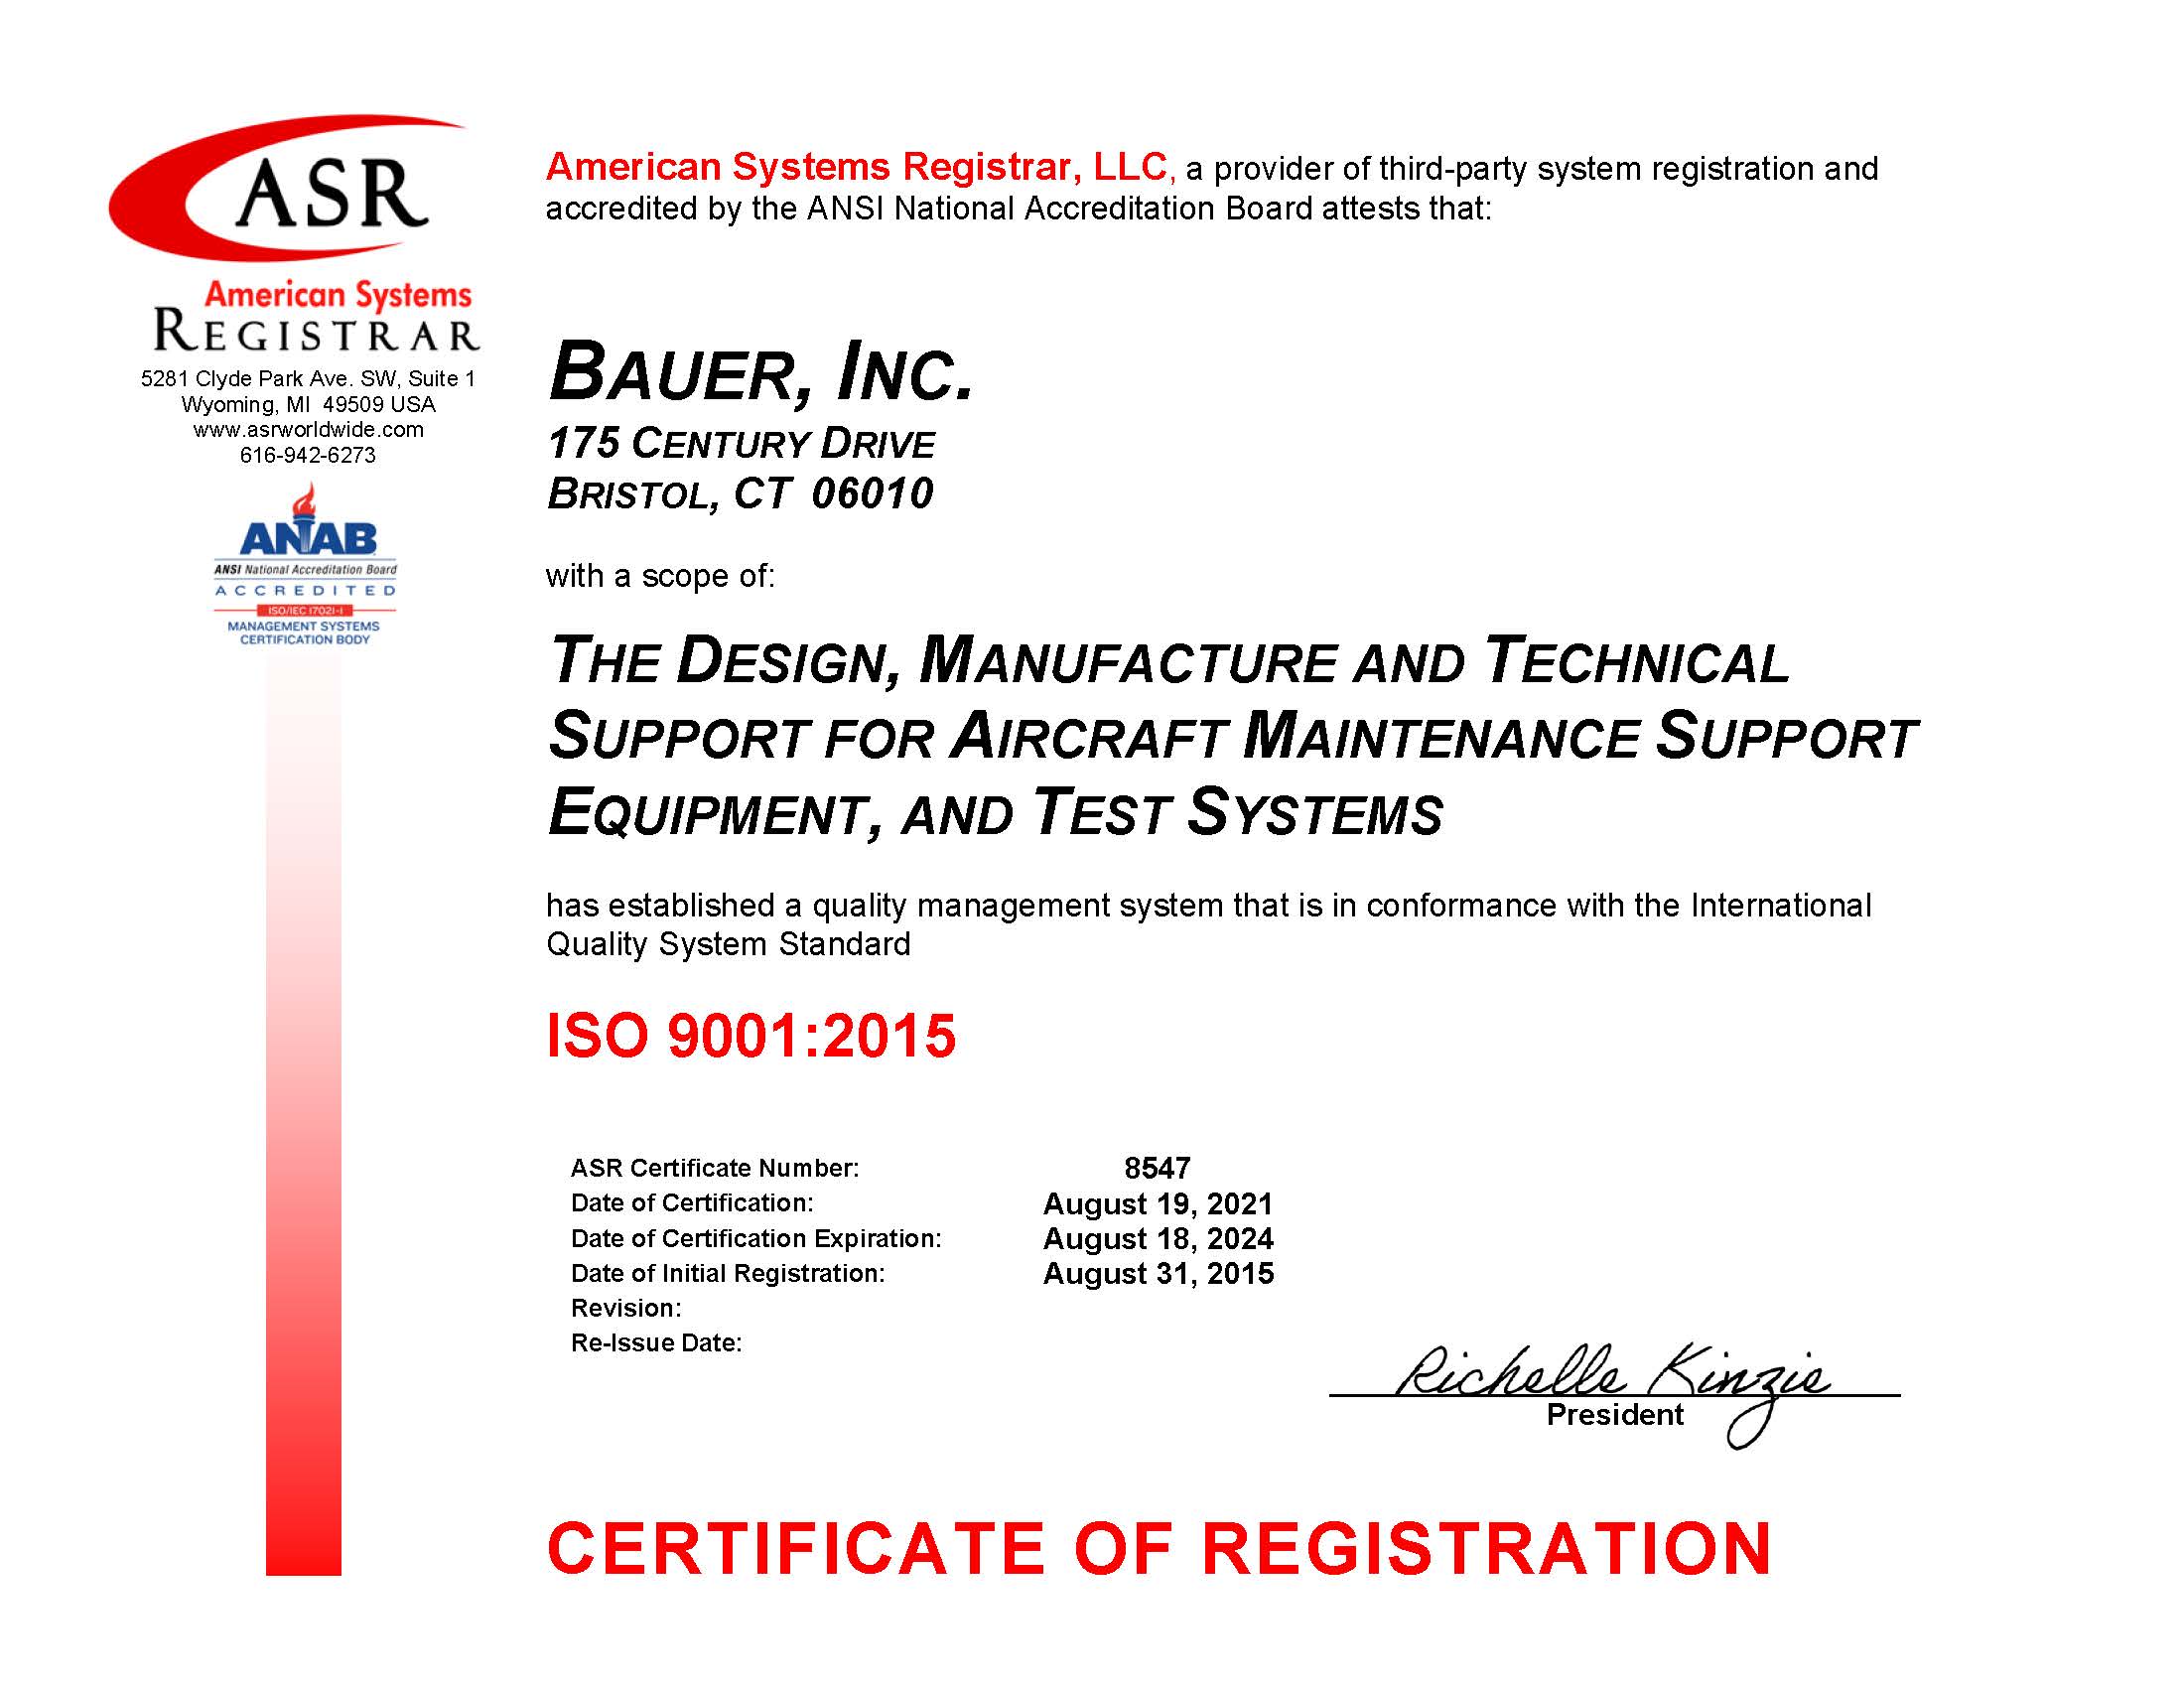 ISO 9001 Certificate Aug.2021 signed